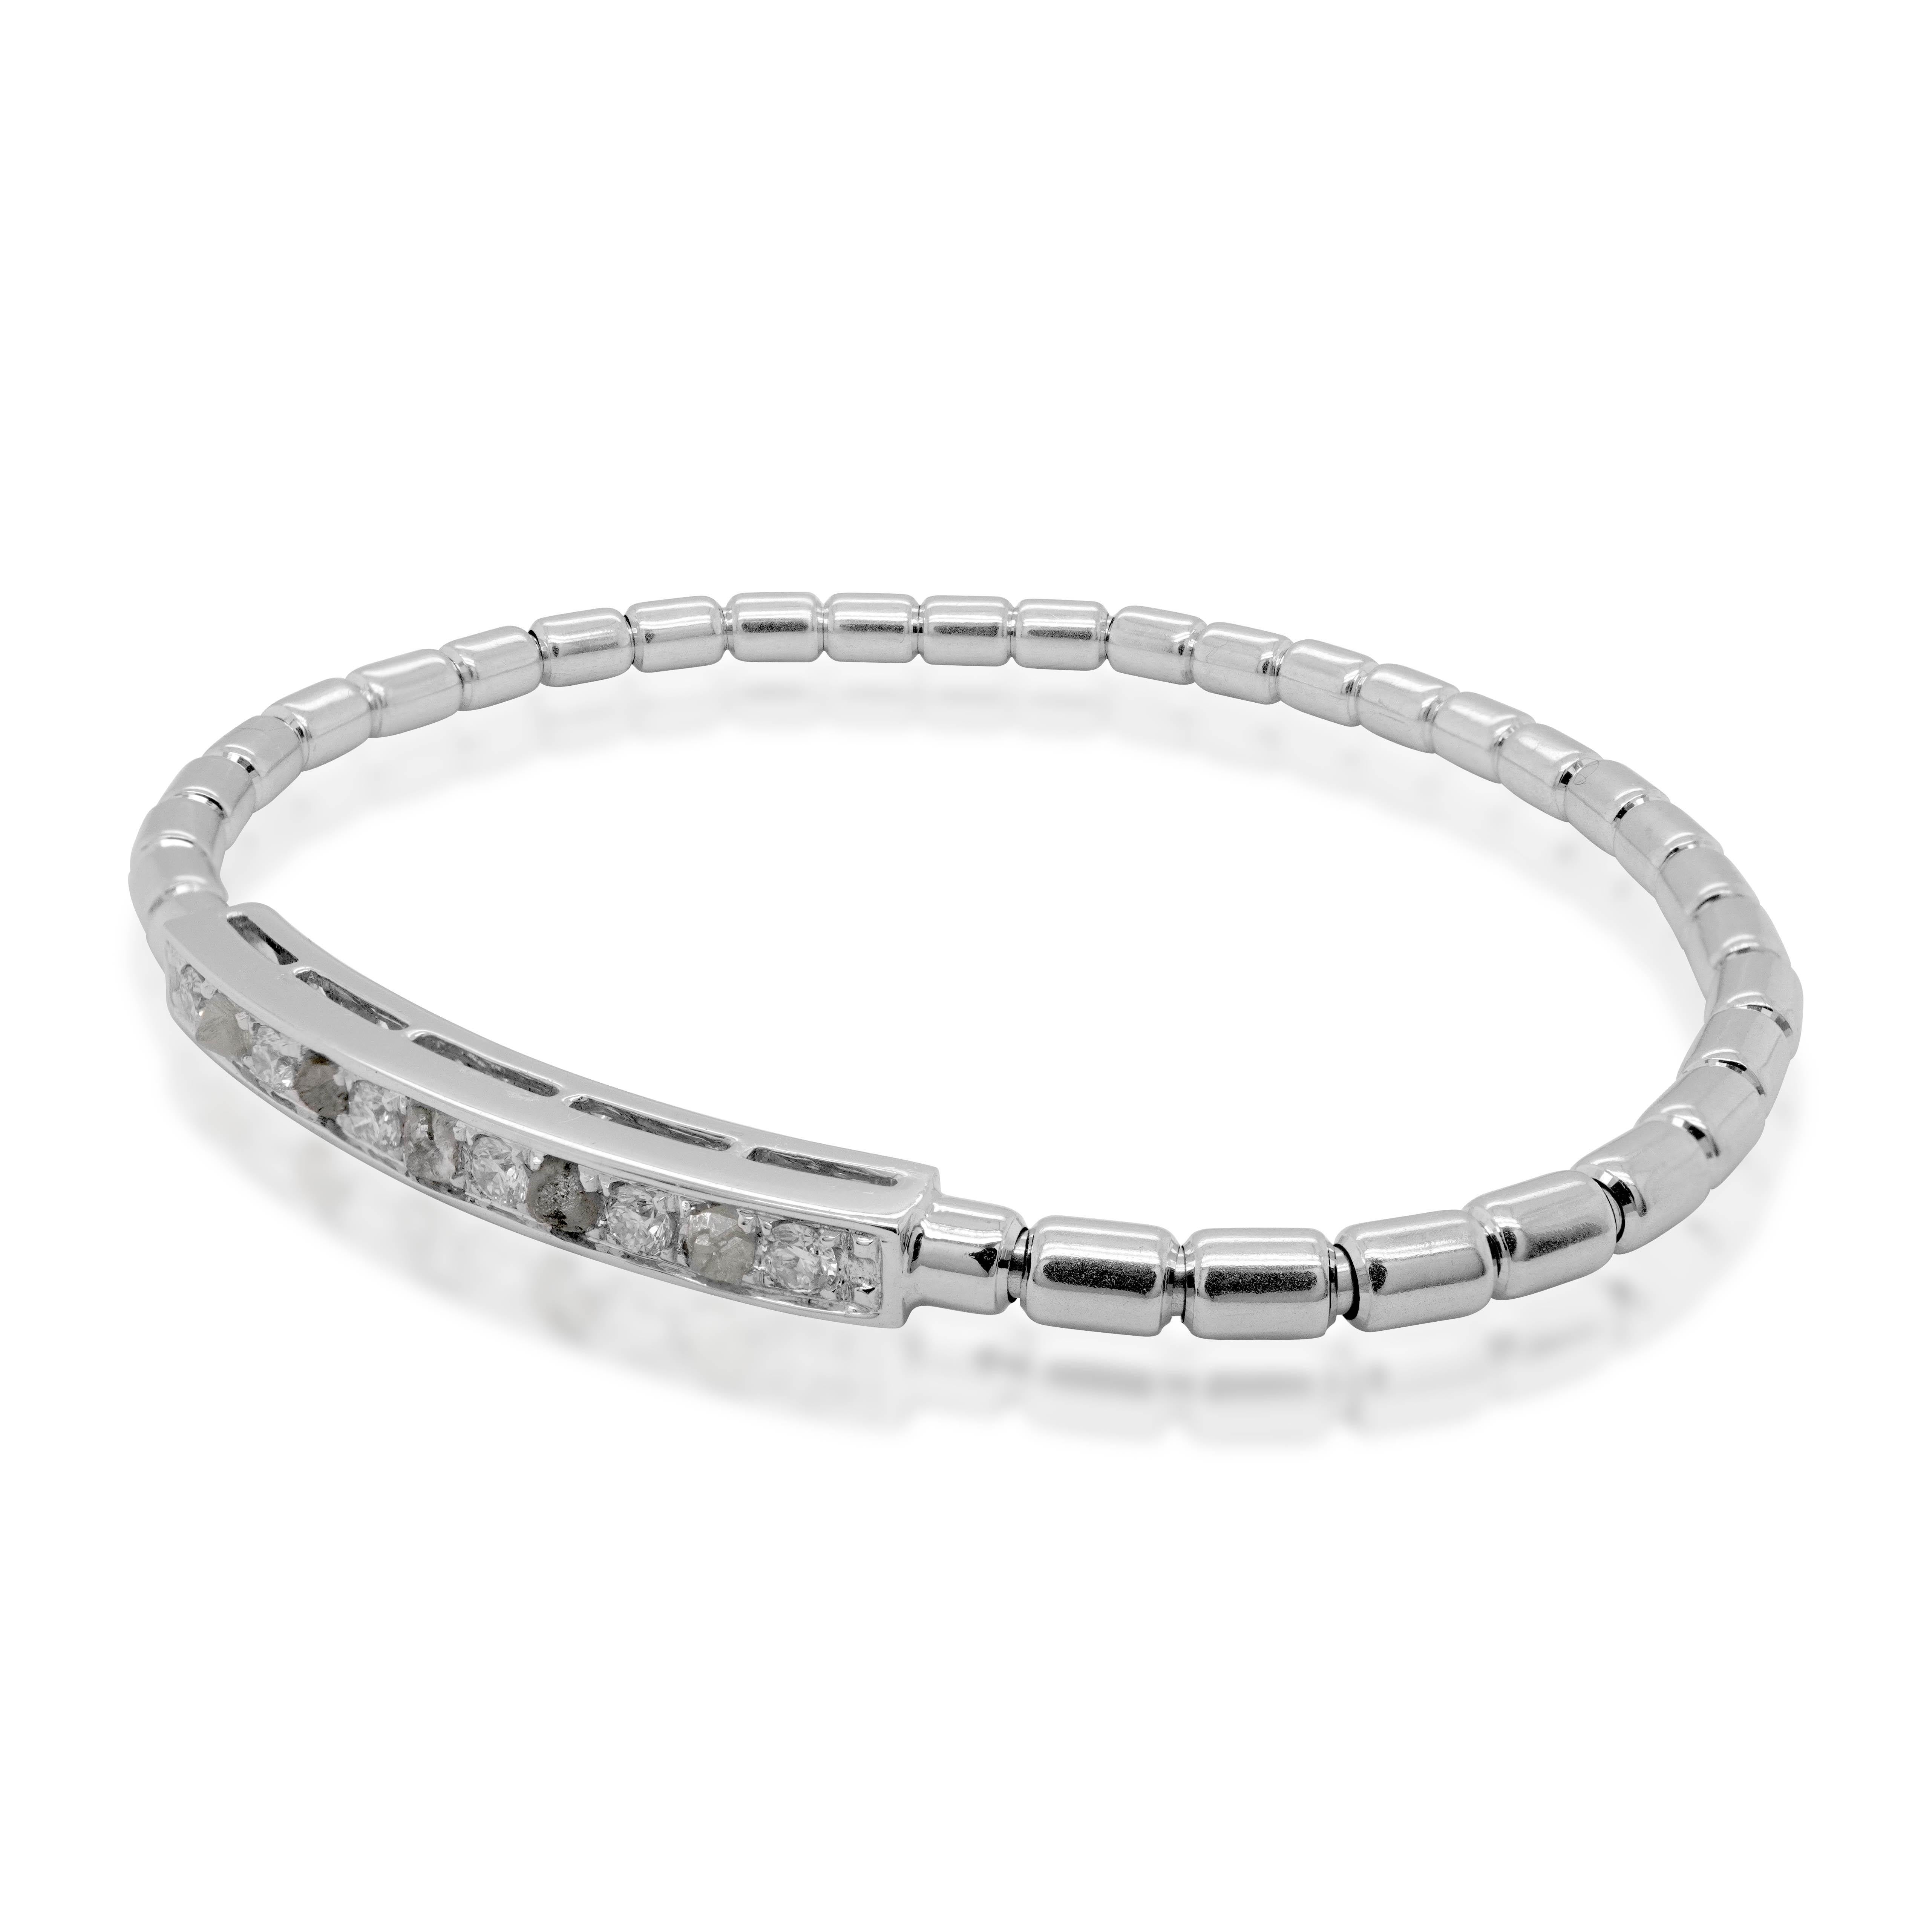 Using ground Breaking innovation, this 18K white gold bracelet uses Japanese technology for bracelet. Using white round diamond and steel gray raw diamonds, the 18K bracelet is a cool chic wear